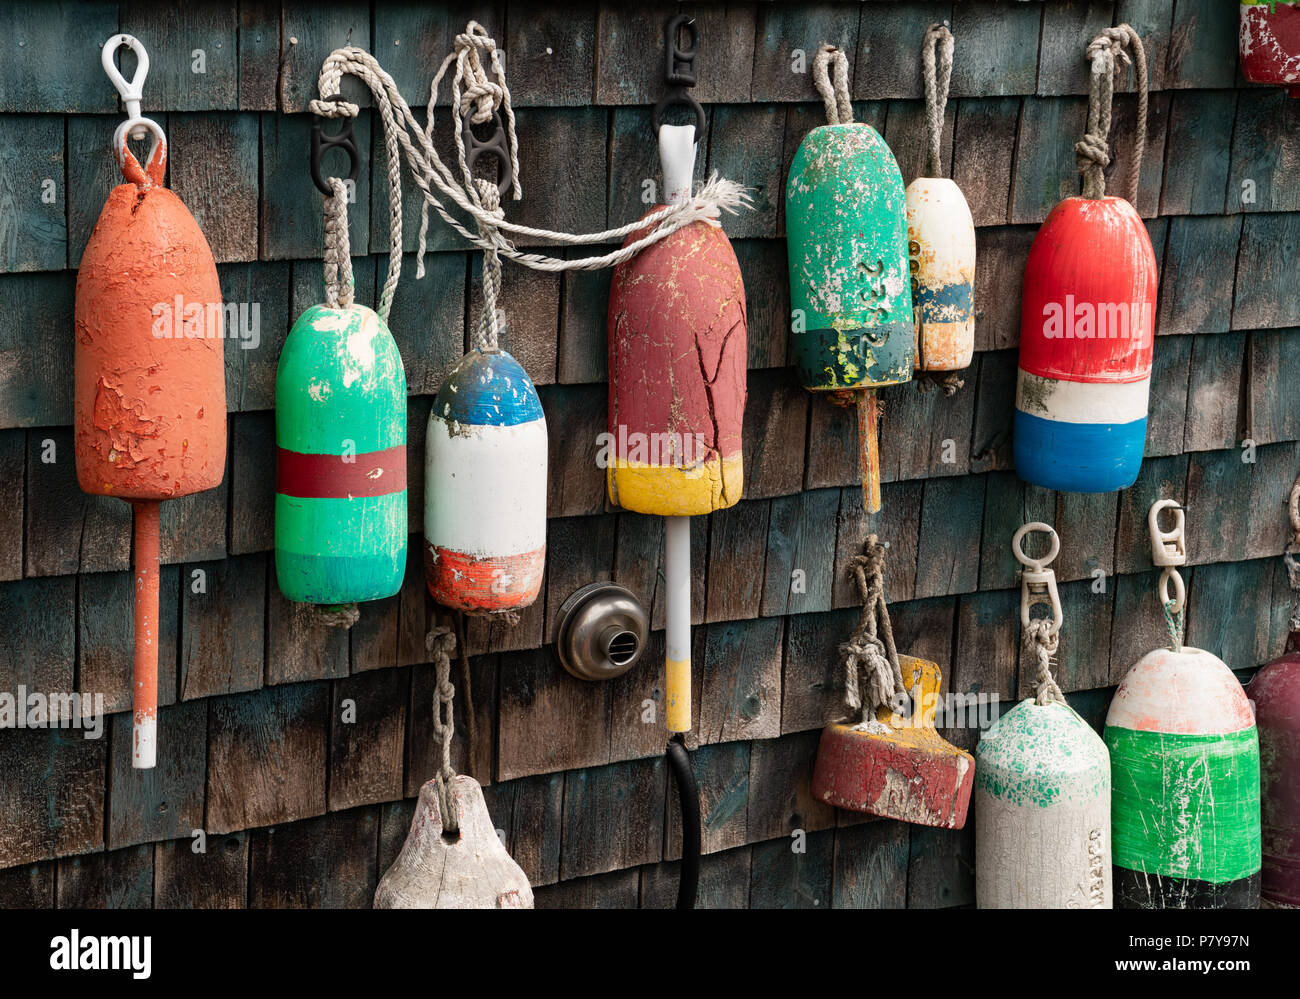 Lobster Buoy in Maine on a fishing pier Stock Photo - Alamy